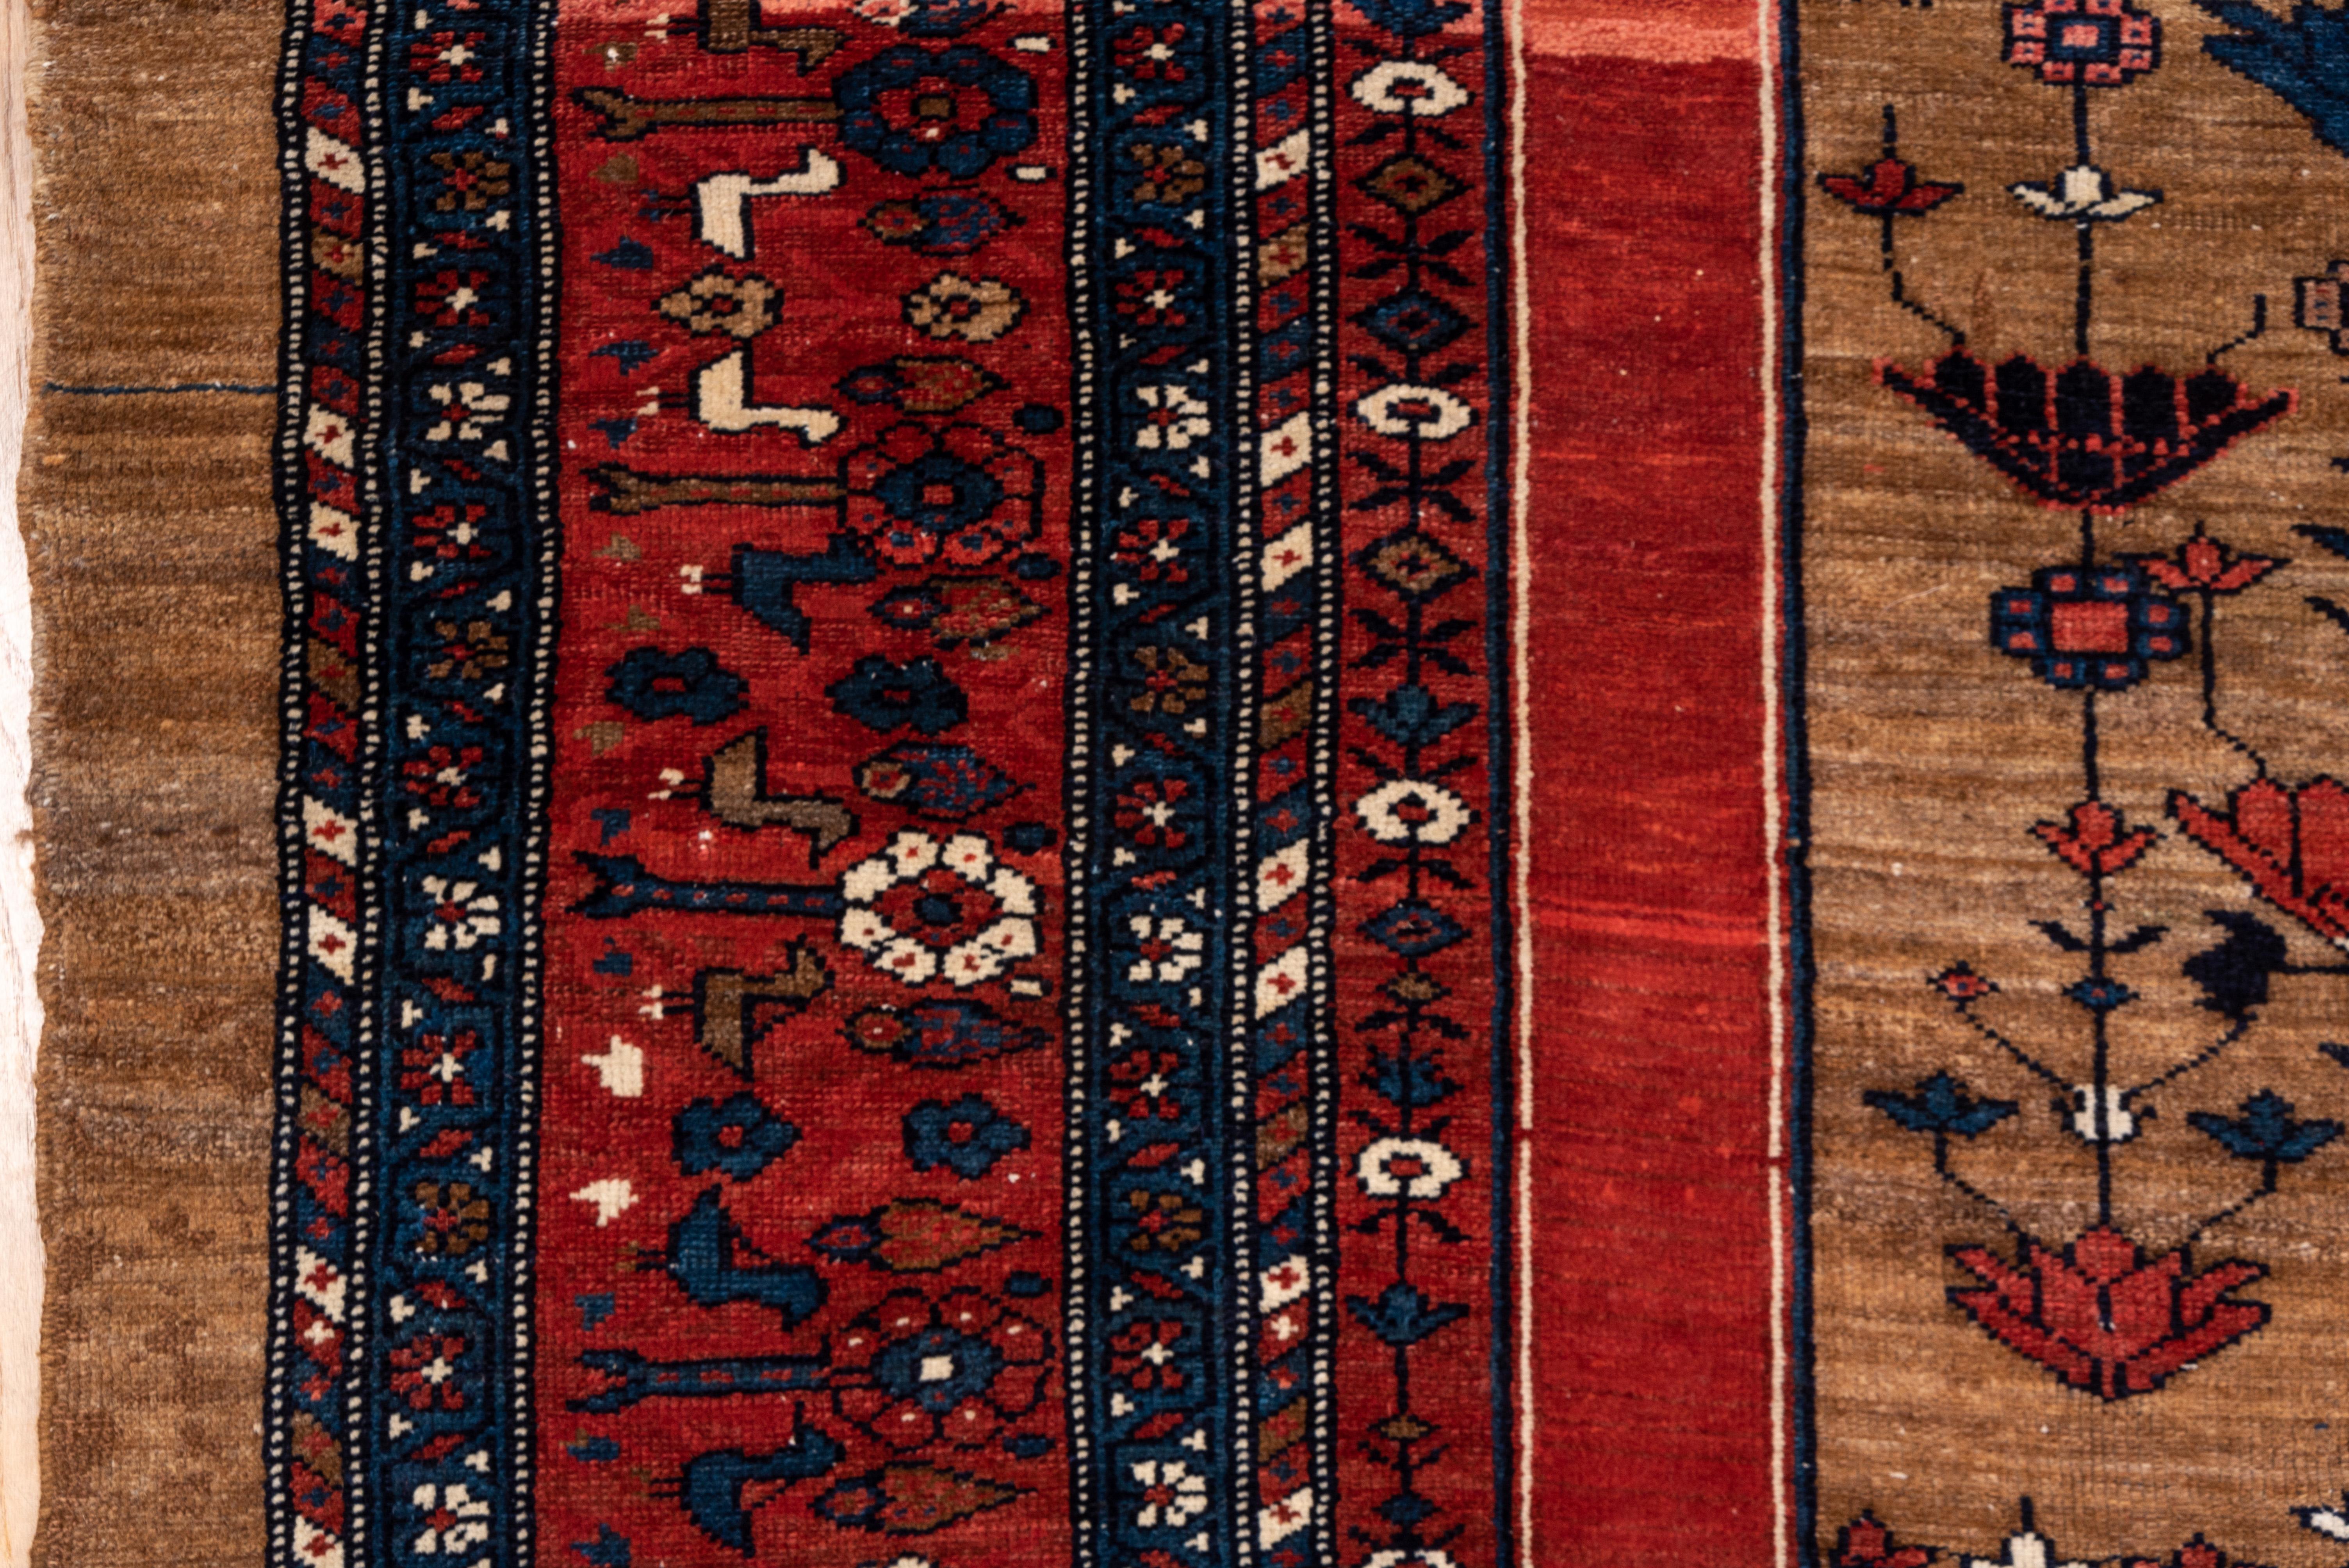 Wool Rare Antique Heriz Bakhshayesh Carpet, Brown and Rich Red Field, B For Sale